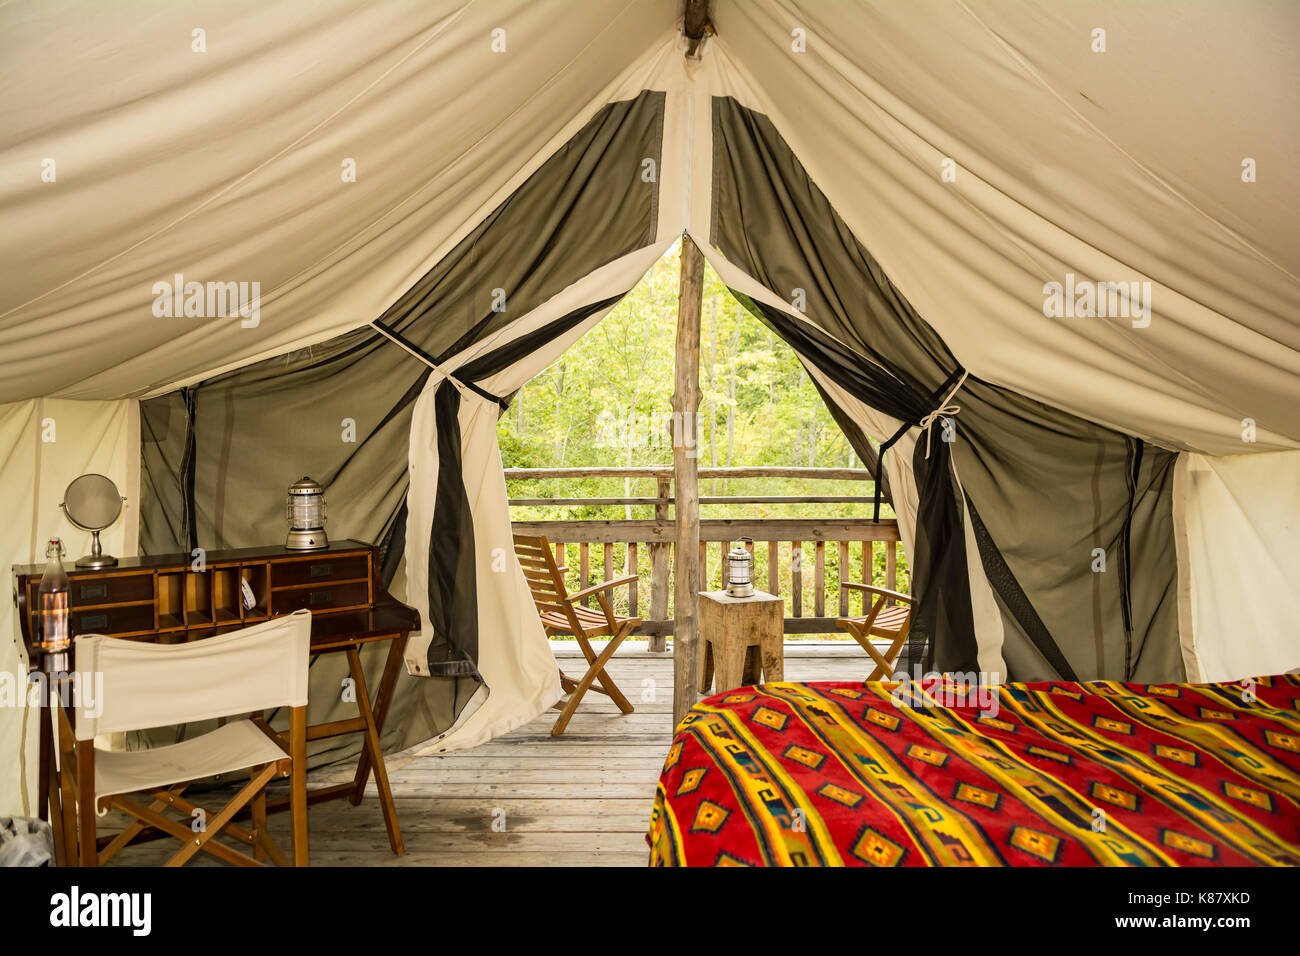 The inside of a glamor camping tent in New York. Stock Photo